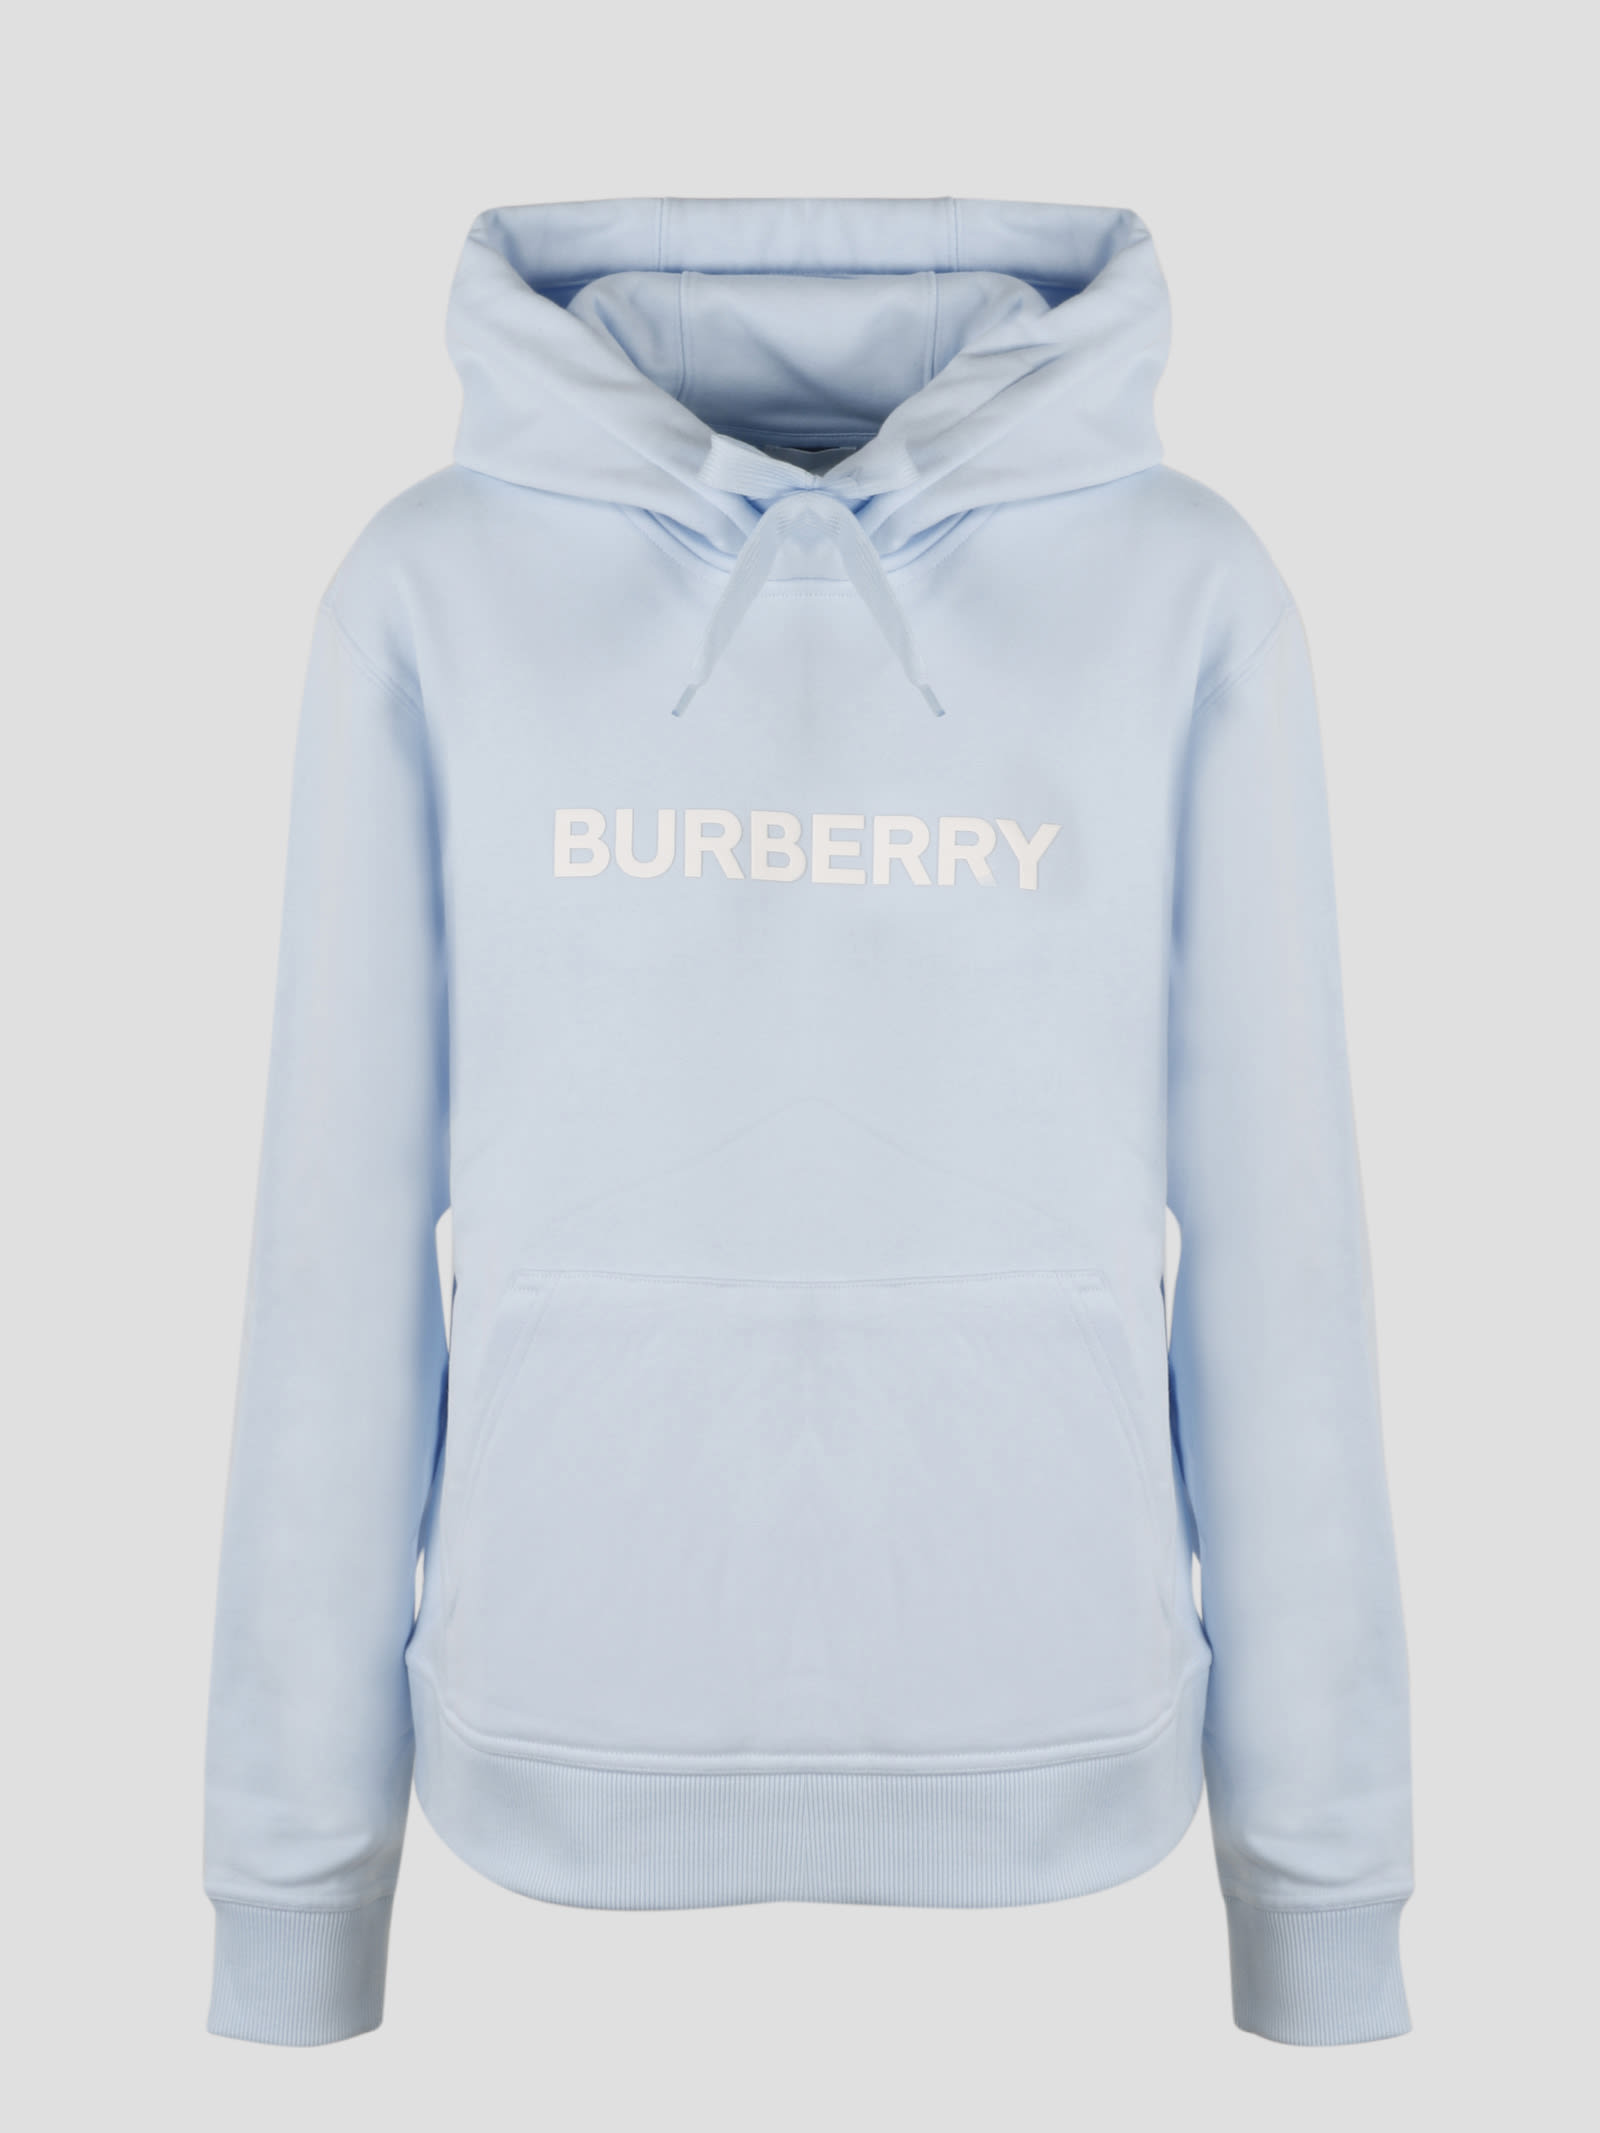 Burberry Poulter Hoodie